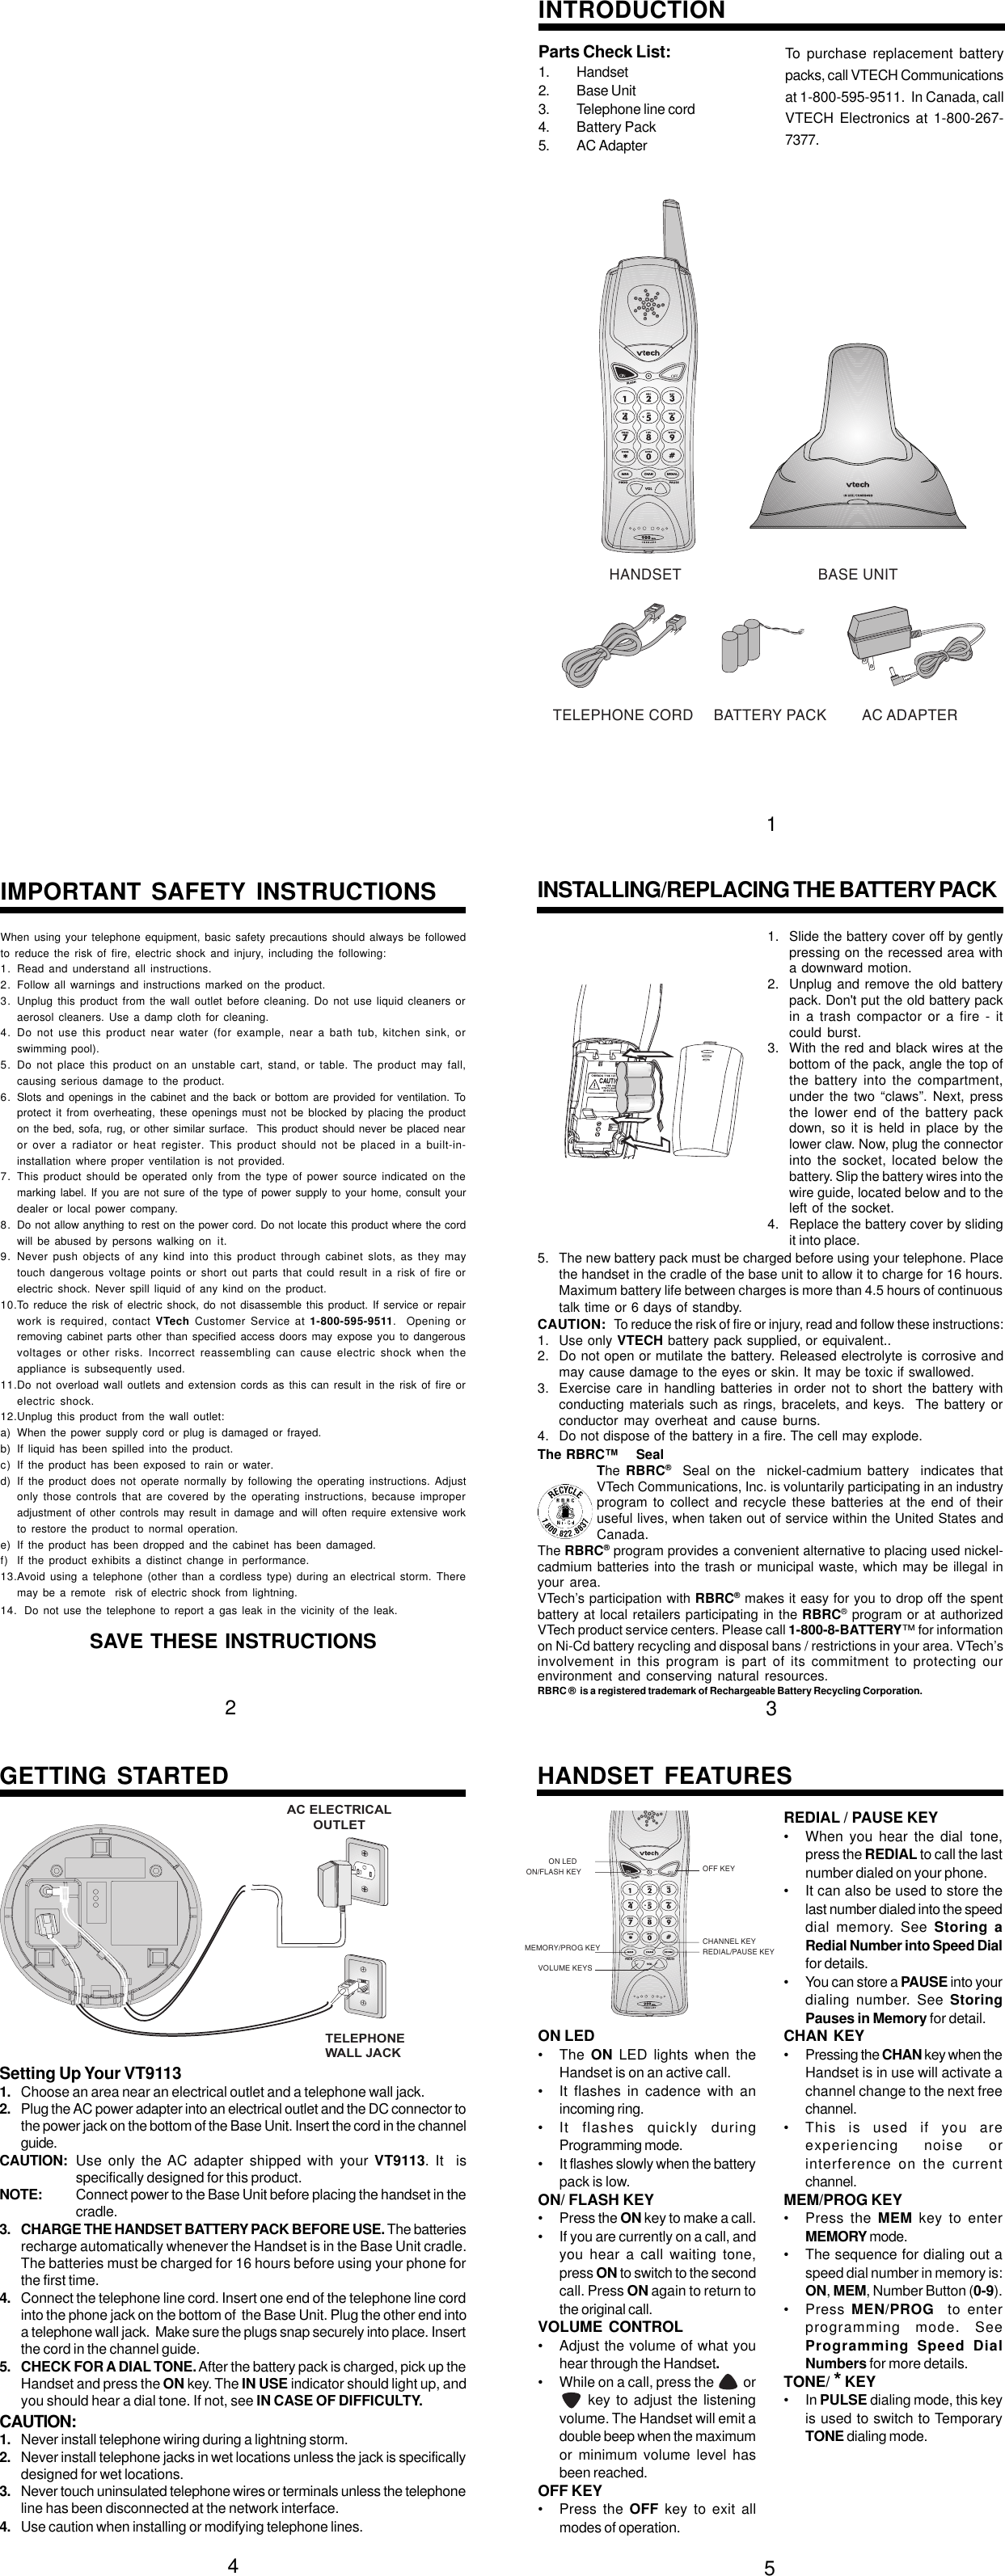 Parts Check List:1. Handset2. Base Unit3. Telephone line cord4. Battery Pack5. AC AdapterWhen using your telephone equipment, basic safety precautions should always be followedto reduce the risk of fire, electric shock and injury, including the following:1. Read and understand all instructions.2. Follow all warnings and instructions marked on the product.3. Unplug this product from the wall outlet before cleaning. Do not use liquid cleaners oraerosol cleaners. Use a damp cloth for cleaning.4. Do not use this product near water (for example, near a bath tub, kitchen sink, orswimming pool).5. Do not place this product on an unstable cart, stand, or table. The product may fall,causing serious damage to the product.6. Slots and openings in the cabinet and the back or bottom are provided for ventilation. Toprotect it from overheating, these openings must not be blocked by placing the producton the bed, sofa, rug, or other similar surface.  This product should never be placed nearor over a radiator or heat register. This product should not be placed in a built-in-installation where proper ventilation is not provided.7. This product should be operated only from the type of power source indicated on themarking label. If you are not sure of the type of power supply to your home, consult yourdealer or local power company.8. Do not allow anything to rest on the power cord. Do not locate this product where the cordwill be abused by persons walking on it.9. Never push objects of any kind into this product through cabinet slots, as they maytouch dangerous voltage points or short out parts that could result in a risk of fire orelectric shock. Never spill liquid of any kind on the product.10.To reduce the risk of electric shock, do not disassemble this product. If service or repairwork is required, contact VTech Customer Service at 1-800-595-9511.  Opening orremoving cabinet parts other than specified access doors may expose you to dangerousvoltages or other risks. Incorrect reassembling can cause electric shock when theappliance is subsequently used.11.Do not overload wall outlets and extension cords as this can result in the risk of fire orelectric shock.12.Unplug this product from the wall outlet:a) When the power supply cord or plug is damaged or frayed.b) If liquid has been spilled into the product.c) If the product has been exposed to rain or water.d) If the product does not operate normally by following the operating instructions. Adjustonly those controls that are covered by the operating instructions, because improperadjustment of other controls may result in damage and will often require extensive workto restore the product to normal operation.e) If the product has been dropped and the cabinet has been damaged.f) If the product exhibits a distinct change in performance.13.Avoid using a telephone (other than a cordless type) during an electrical storm. Theremay be a remote  risk of electric shock from lightning.14. Do not use the telephone to report a gas leak in the vicinity of the leak.SAVE THESE INSTRUCTIONS1. Slide the battery cover off by gentlypressing on the recessed area witha downward motion.2. Unplug and remove the old batterypack. Don&apos;t put the old battery packin a trash compactor or a fire - itcould burst.3. With the red and black wires at thebottom of the pack, angle the top ofthe battery into the compartment,under the two “claws”. Next, pressthe lower end of the battery packdown, so it is held in place by thelower claw. Now, plug the connectorinto the socket, located below thebattery. Slip the battery wires into thewire guide, located below and to theleft of the socket.4. Replace the battery cover by slidingit into place.INTRODUCTIONTo purchase replacement batterypacks, call VTECH Communicationsat 1-800-595-9511.  In Canada, callVTECH Electronics at 1-800-267-7377.IMPORTANT SAFETY INSTRUCTIONS INSTALLING/REPLACING THE BATTERY PACK5. The new battery pack must be charged before using your telephone. Placethe handset in the cradle of the base unit to allow it to charge for 16 hours.Maximum battery life between charges is more than 4.5 hours of continuoustalk time or 6 days of standby.CAUTION: To reduce the risk of fire or injury, read and follow these instructions:1. Use only VTECH battery pack supplied, or equivalent..2. Do not open or mutilate the battery. Released electrolyte is corrosive andmay cause damage to the eyes or skin. It may be toxic if swallowed.3. Exercise care in handling batteries in order not to short the battery withconducting materials such as rings, bracelets, and keys.  The battery orconductor may overheat and cause burns.4. Do not dispose of the battery in a fire. The cell may explode.The RBRC™    SealThe RBRC®  Seal on the  nickel-cadmium battery  indicates thatVTech Communications, Inc. is voluntarily participating in an industryprogram to collect and recycle these batteries at the end of theiruseful lives, when taken out of service within the United States andCanada.The RBRC® program provides a convenient alternative to placing used nickel-cadmium batteries into the trash or municipal waste, which may be illegal inyour area.VTech’s participation with RBRC® makes it easy for you to drop off the spentbattery at local retailers participating in the RBRC® program or at authorizedVTech product service centers. Please call 1-800-8-BATTERY™ for informationon Ni-Cd battery recycling and disposal bans / restrictions in your area. VTech’sinvolvement in this program is part of its commitment to protecting ourenvironment and conserving natural resources.RBRC ®  is a registered trademark of Rechargeable Battery Recycling Corporation.HANDSET BASE UNITTELEPHONE CORD BATTERY PACK AC ADAPTER123Setting Up Your VT91131. Choose an area near an electrical outlet and a telephone wall jack.2. Plug the AC power adapter into an electrical outlet and the DC connector tothe power jack on the bottom of the Base Unit. Insert the cord in the channelguide.CAUTION: Use only the AC adapter shipped with your VT9113. It  isspecifically designed for this product.NOTE: Connect power to the Base Unit before placing the handset in thecradle.3. CHARGE THE HANDSET BATTERY PACK BEFORE USE. The batteriesrecharge automatically whenever the Handset is in the Base Unit cradle.The batteries must be charged for 16 hours before using your phone forthe first time.4. Connect the telephone line cord. Insert one end of the telephone line cordinto the phone jack on the bottom of  the Base Unit. Plug the other end intoa telephone wall jack.  Make sure the plugs snap securely into place. Insertthe cord in the channel guide.5. CHECK FOR A DIAL TONE. After the battery pack is charged, pick up theHandset and press the ON key. The IN USE indicator should light up, andyou should hear a dial tone. If not, see IN CASE OF DIFFICULTY.CAUTION:1. Never install telephone wiring during a lightning storm.2. Never install telephone jacks in wet locations unless the jack is specificallydesigned for wet locations.3. Never touch uninsulated telephone wires or terminals unless the telephoneline has been disconnected at the network interface.4. Use caution when installing or modifying telephone lines.ON LED• The  ON LED lights when theHandset is on an active call.• It flashes in cadence with anincoming ring.• It flashes quickly duringProgramming mode.• It flashes slowly when the batterypack is low.ON/ FLASH KEY• Press the ON key to make a call.• If you are currently on a call, andyou hear a call waiting tone,press ON to switch to the secondcall. Press ON again to return tothe original call.VOLUME  CONTROL• Adjust the volume of what youhear through the Handset.• While on a call, press the          or     key to adjust the listeningvolume. The Handset will emit adouble beep when the maximumor minimum volume level hasbeen reached.OFF KEY• Press the OFF key to exit allmodes of operation.GETTING STARTED HANDSET FEATURESREDIAL / PAUSE KEY• When you hear the dial tone,press the REDIAL to call the lastnumber dialed on your phone.• It can also be used to store thelast number dialed into the speeddial memory. See Storing aRedial Number into Speed Dialfor details.• You can store a PAUSE into yourdialing number. See StoringPauses in Memory for detail.CHAN KEY• Pressing the CHAN key when theHandset is in use will activate achannel change to the next freechannel.• This is used if you areexperiencing noise orinterference on the currentchannel.MEM/PROG KEY• Press the MEM key to enterMEMORY mode.• The sequence for dialing out aspeed dial number in memory is:ON, MEM, Number Button (0-9).• Press  MEN/PROG  to enterprogramming mode. SeeProgramming Speed DialNumbers for more details.TONE/ * KEY• In PULSE dialing mode, this keyis used to switch to TemporaryTONE dialing mode.TELEPHONEWALL JACKAC ELECTRICALOUTLET45ON/FLASH KEYMEMORY/PROG KEYVOLUME KEYSOFF KEYCHANNEL KEYREDIAL/PAUSE KEYON LED